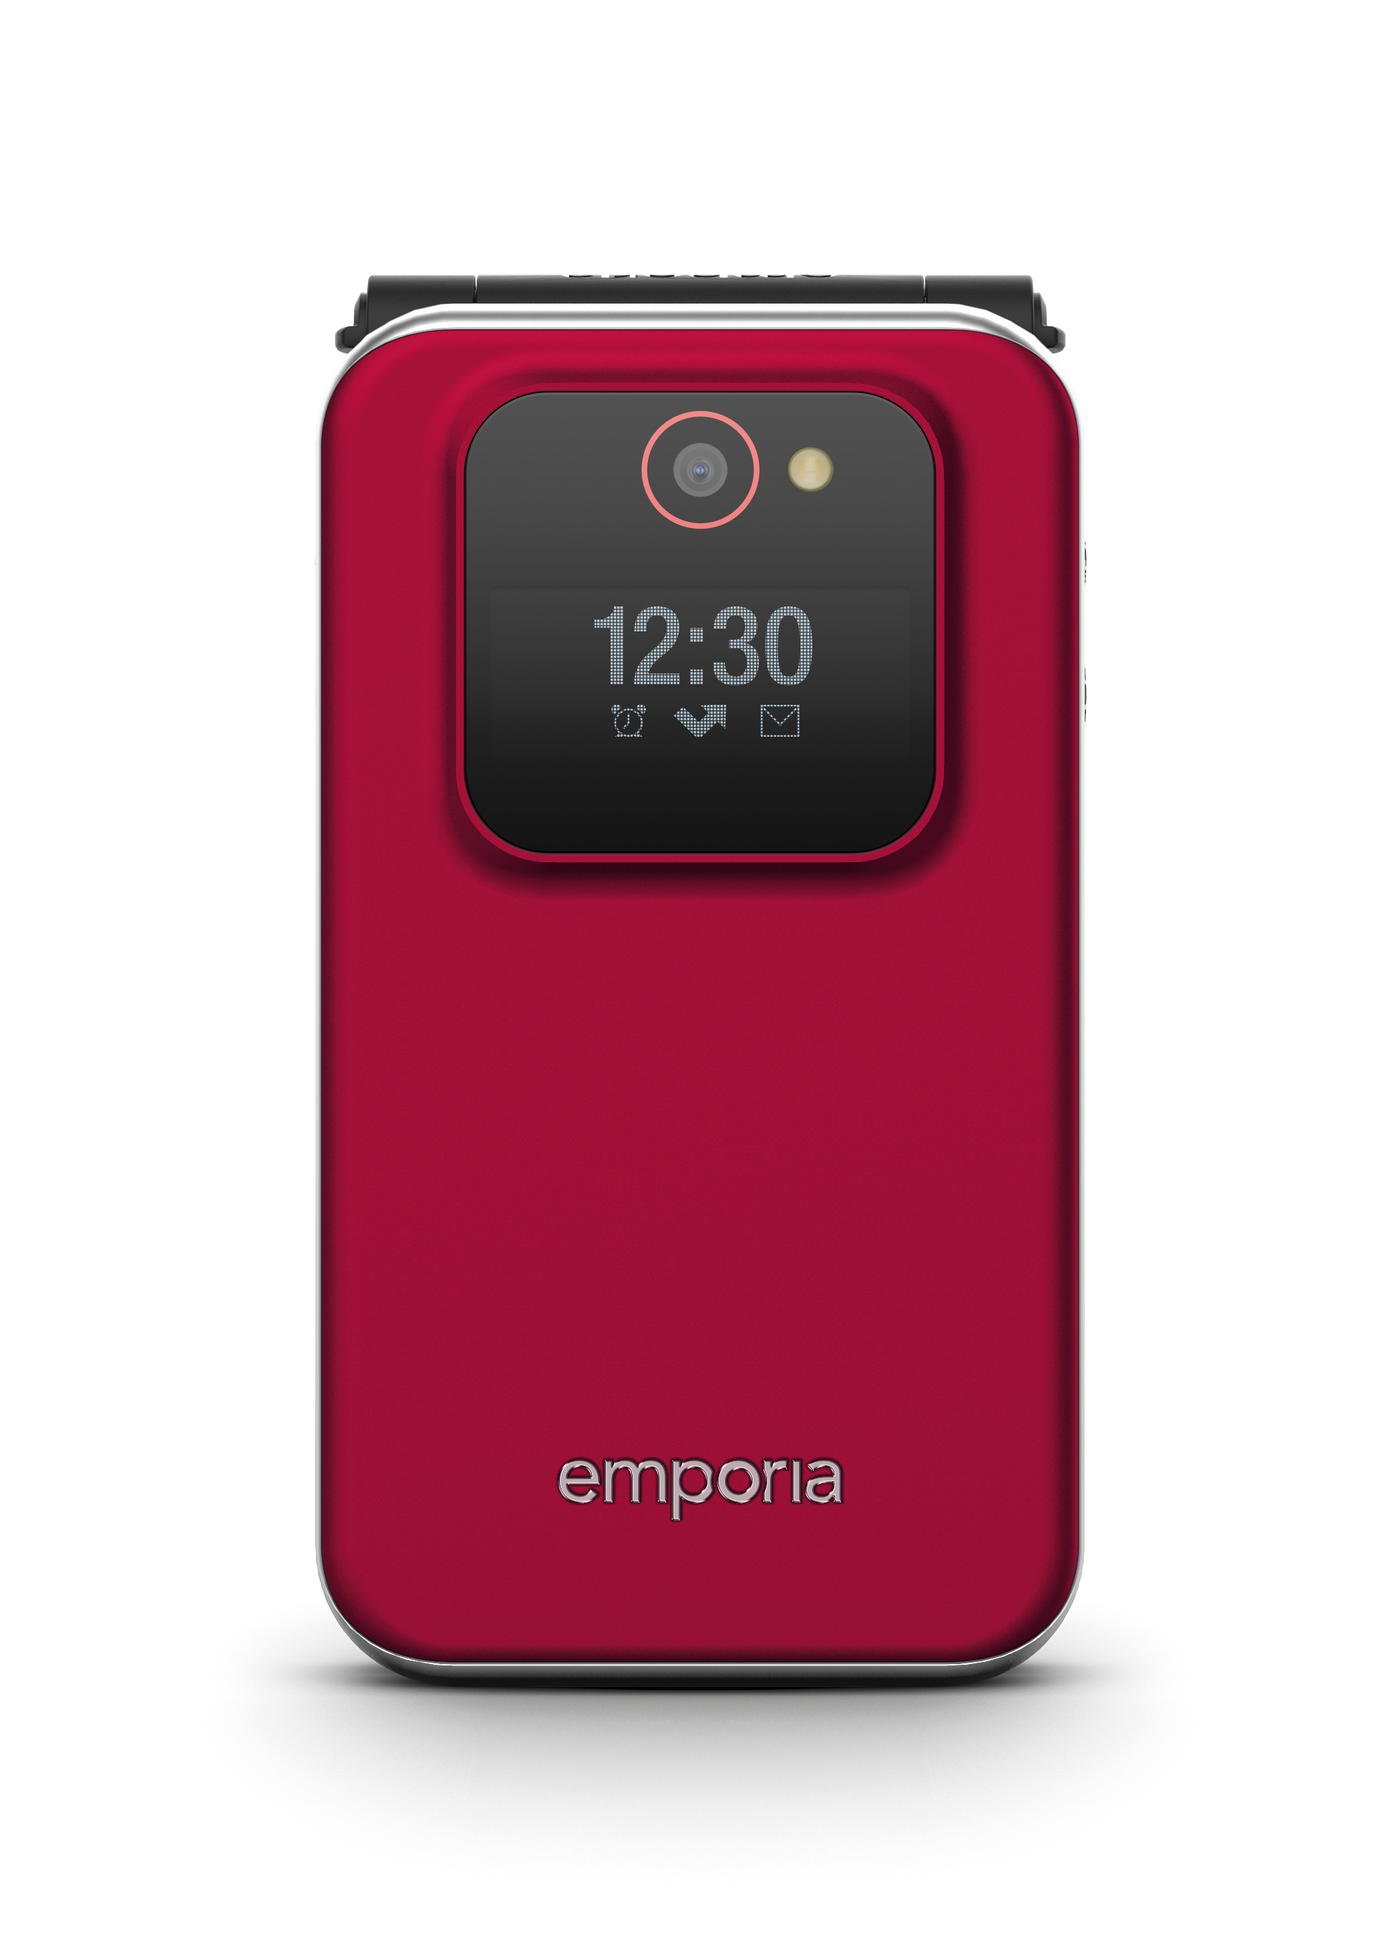 emporiaJOY with a FREE months calls & texts and FREE protective carry pouch